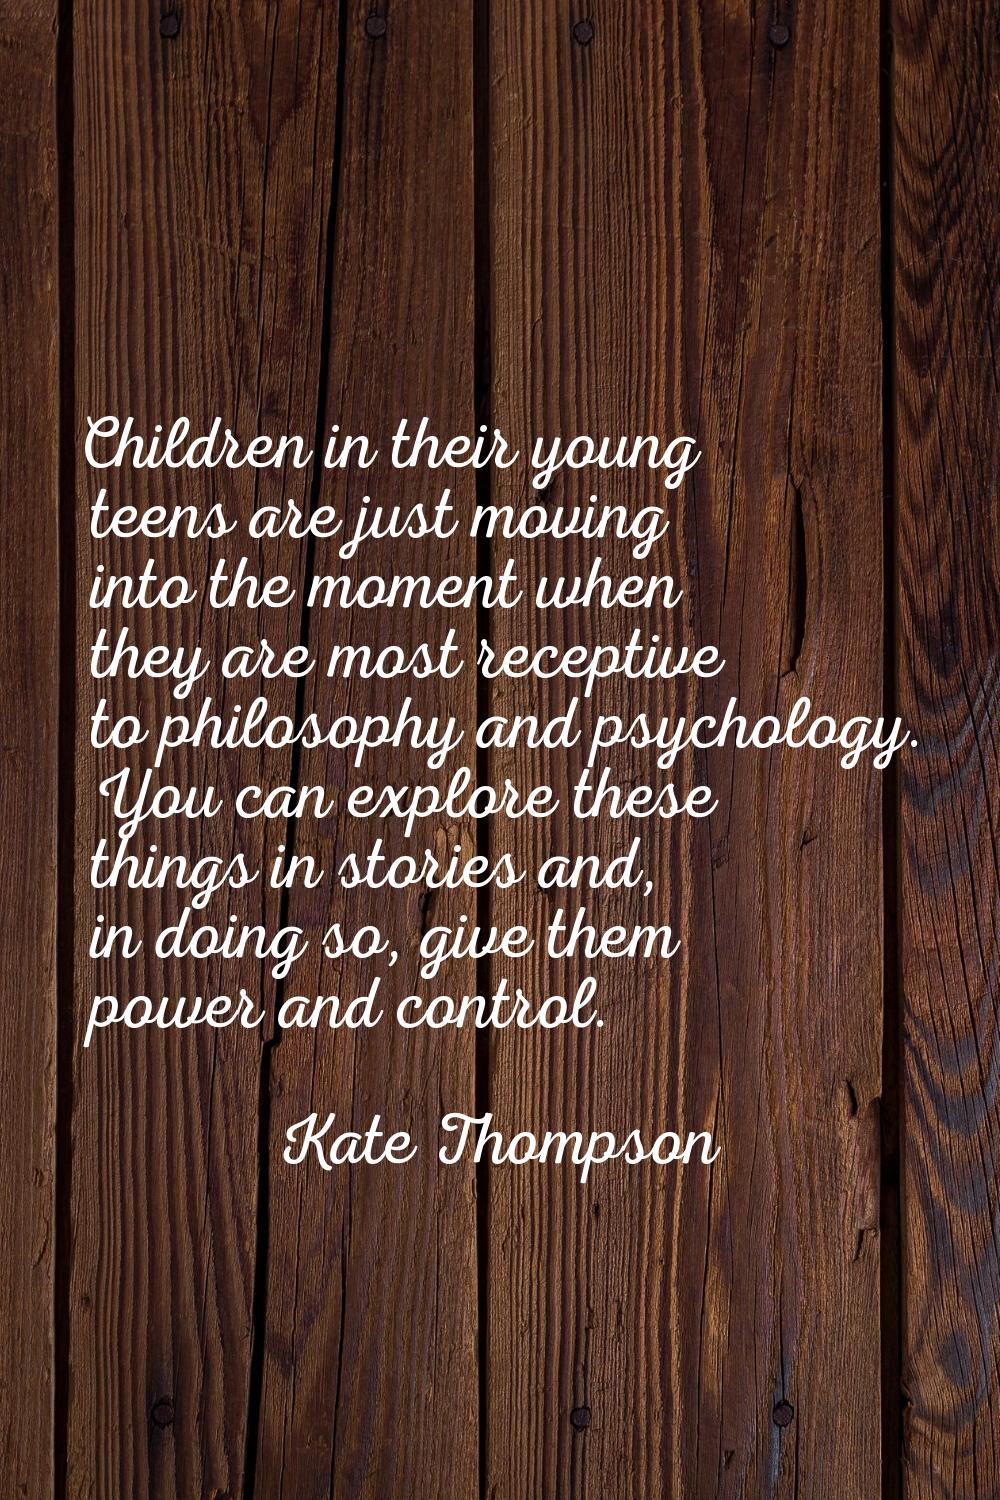 Children in their young teens are just moving into the moment when they are most receptive to philo